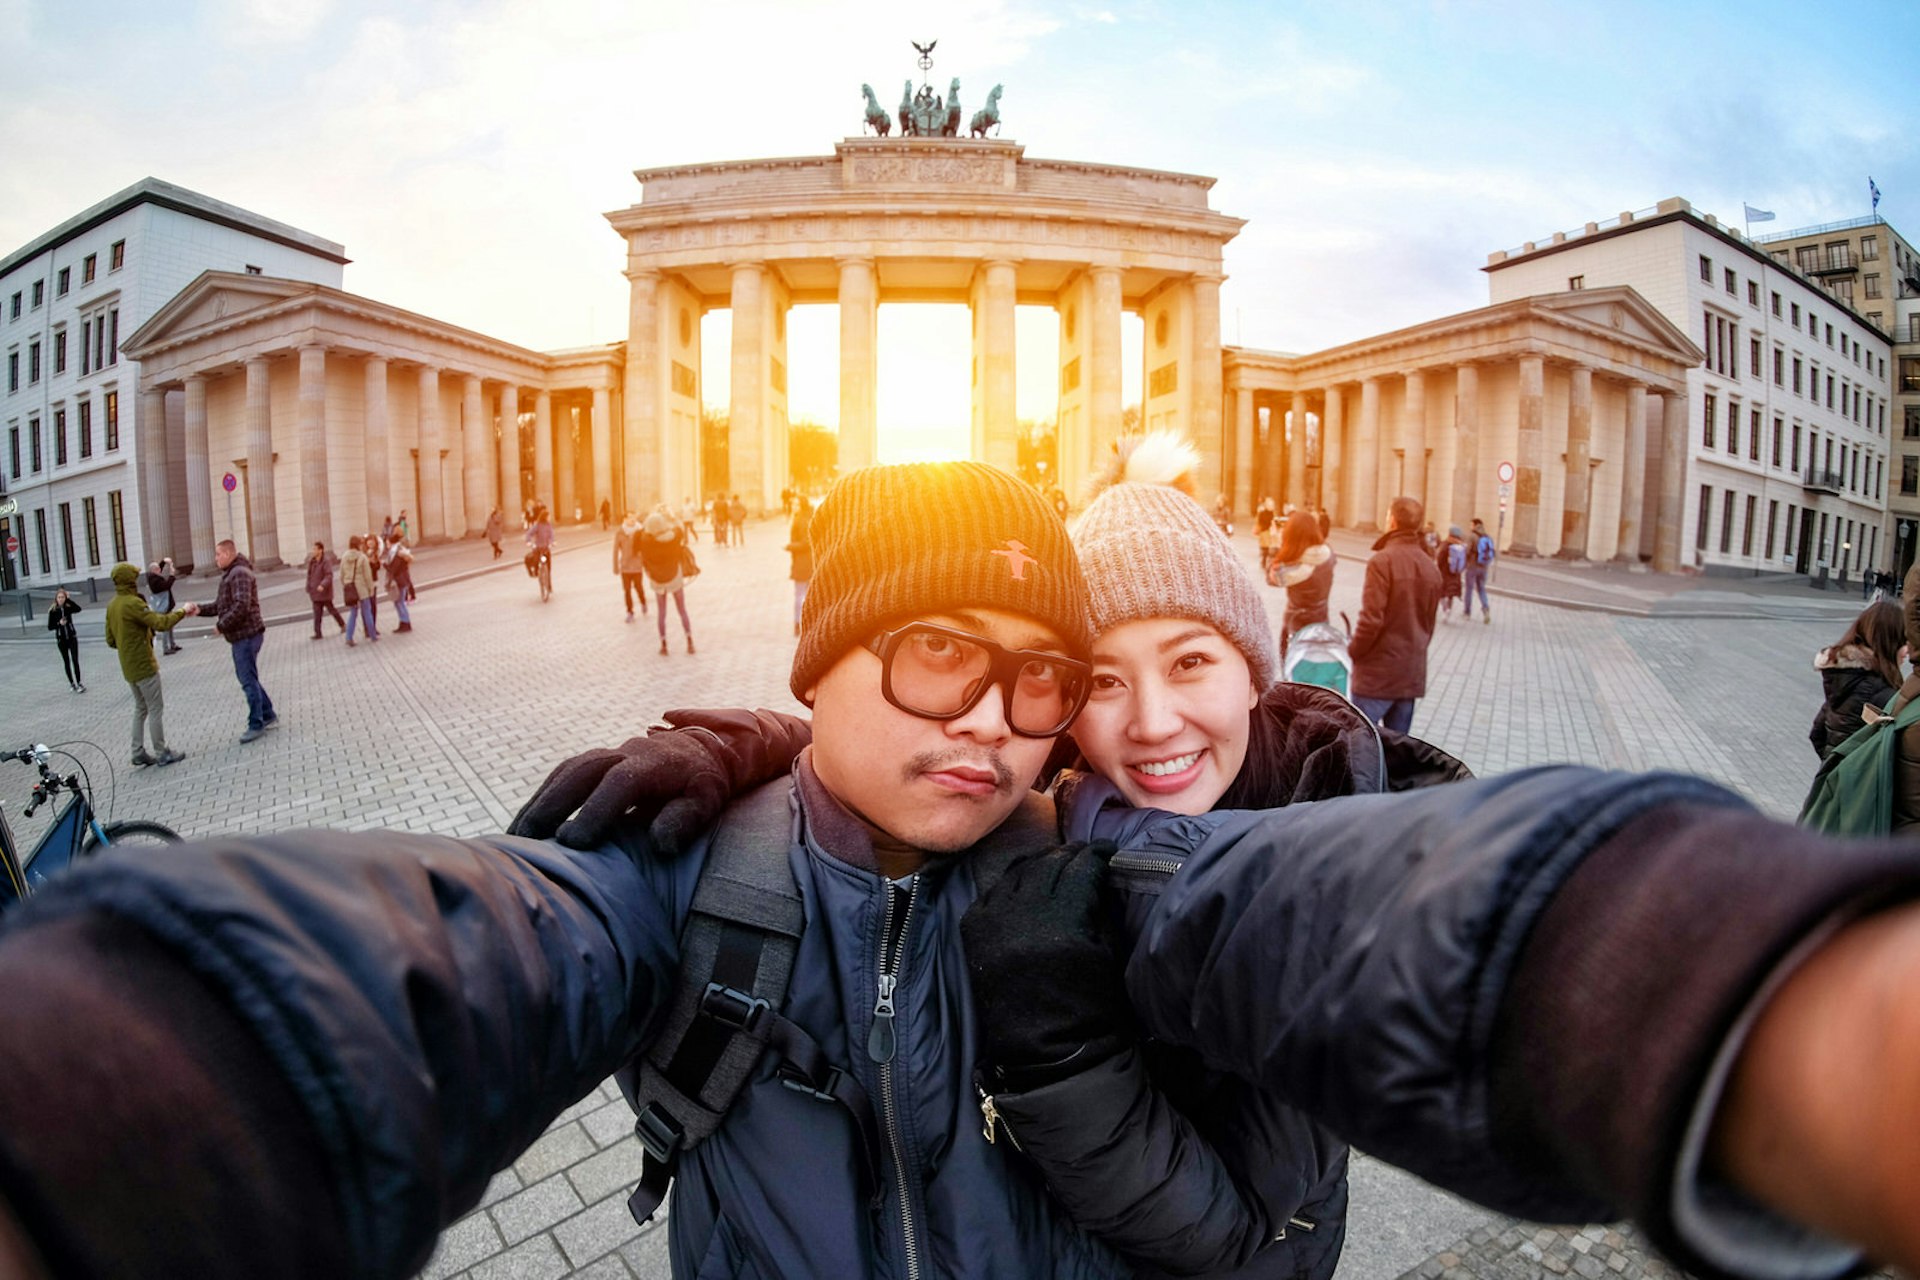 A couple taking a selfie in front of Brandenburg Gate, Berlin, at sunset. The man has his arms outstretched to hold the camera and the woman has her arms wrapped around him. They are both wearing warm coats and woolly hats.